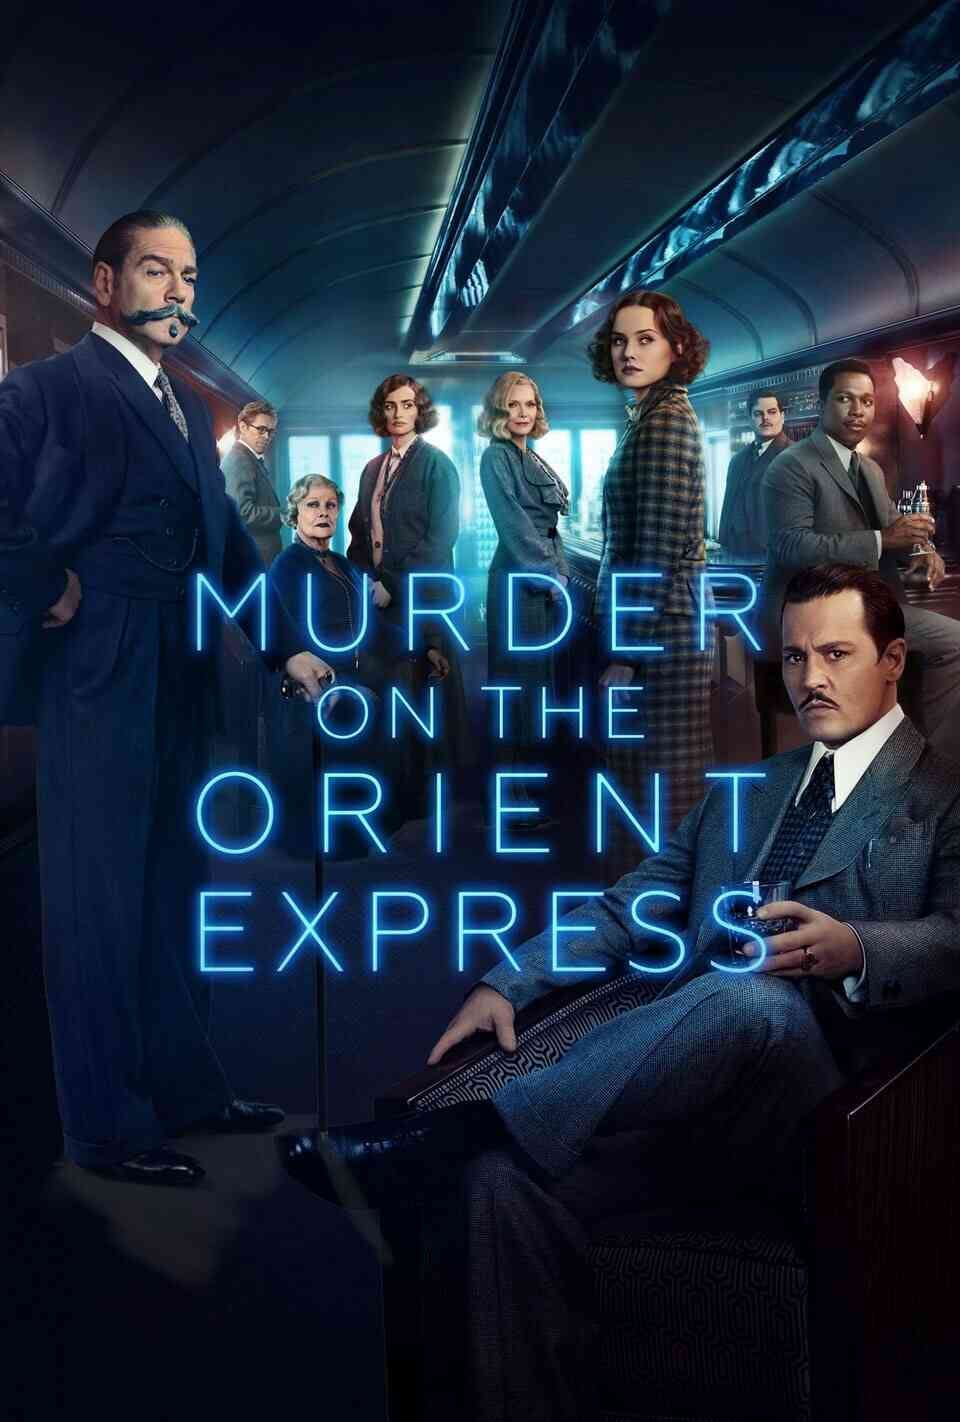 Read Murder on the Orient Express screenplay (poster)